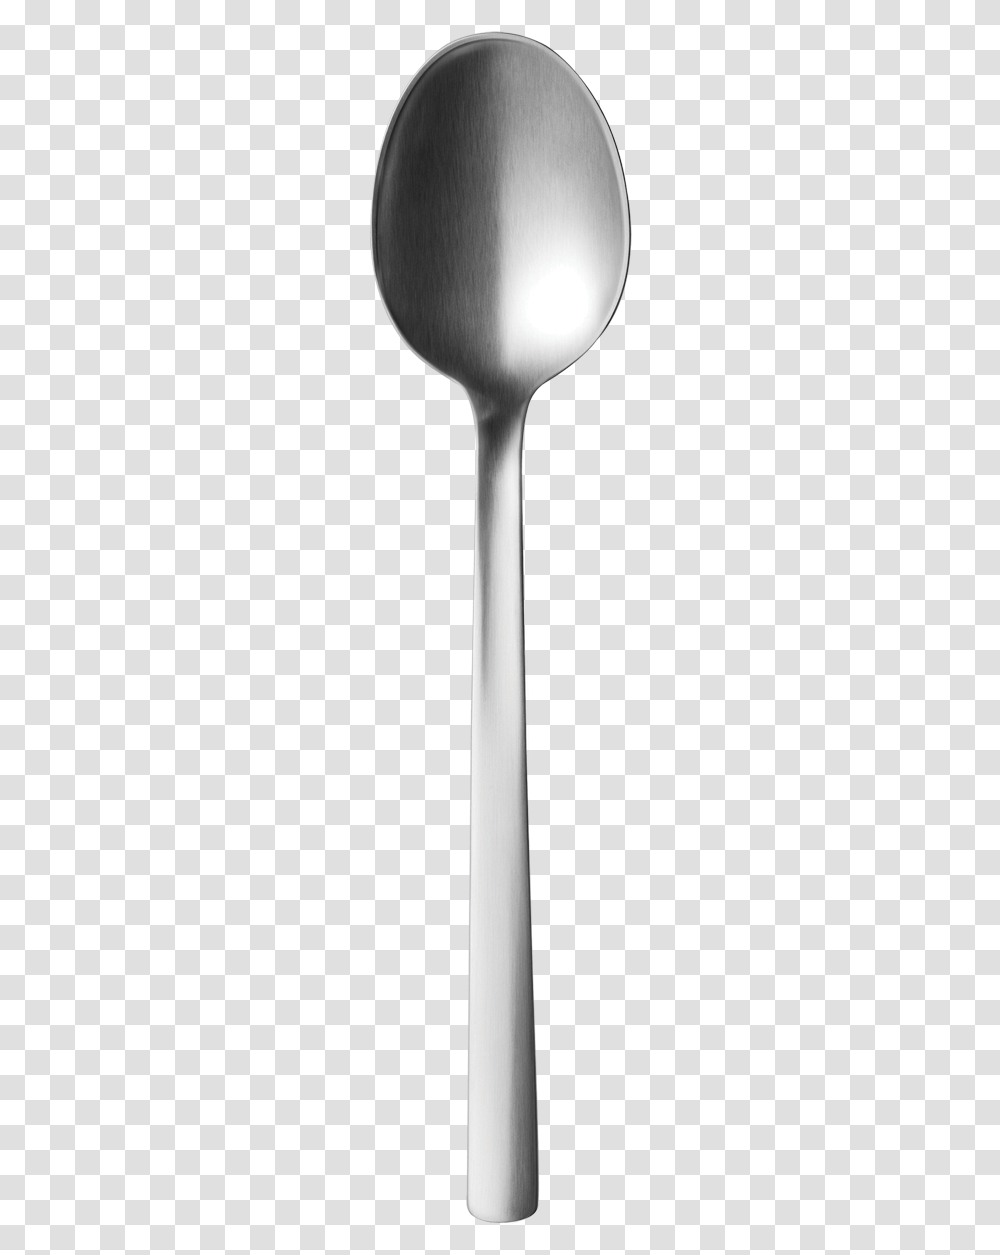 Background Spoon, Cutlery, Tool, Toothbrush, Weapon Transparent Png